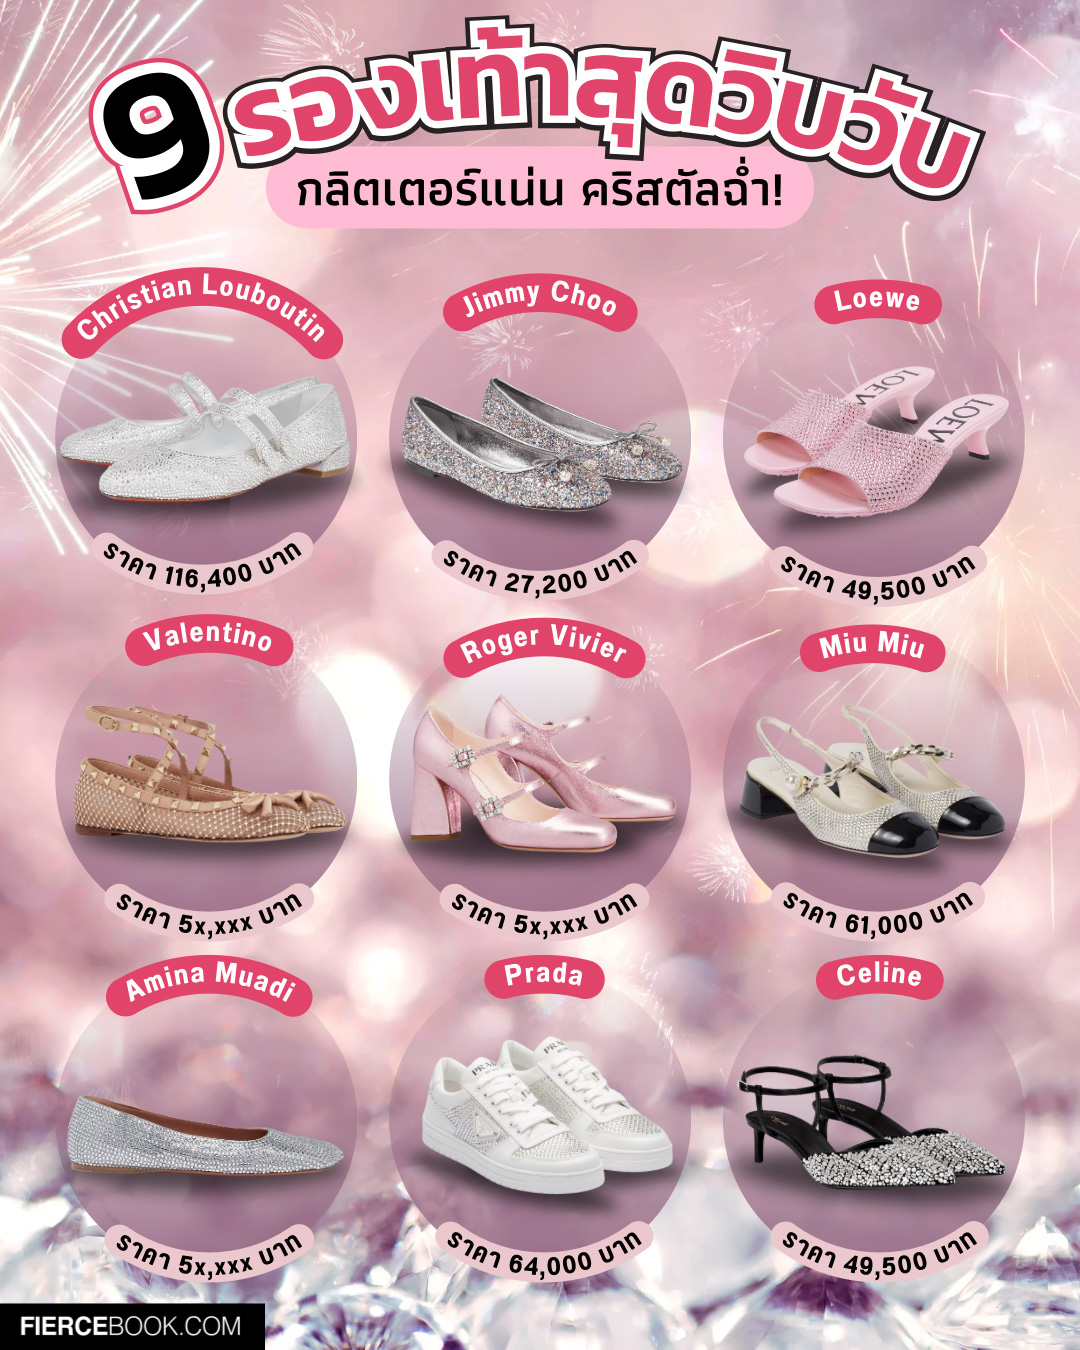 Fashion, รองเท้า, กลิตเตอร์, คริสตัล, Shoes, Crystal, Glitter, Christian Louboutin Sweet Jane Strass, Jimmy Choo Elme Flat, Loewe Petal Kitten Heel Slide In Suede And Allover Rhinestones, Valentino Rockstud Mesh Ballerina With Crystals, Roger Vivier Mini Très Vivier Strass Buckle Babies Pumps in Leather, Miu Miu Satin And Crystal Slingback Pumps, Amina Muadi Ane Crystal Flat Silver Suede, Prada Leather Sneakers With Crystals, Celine Kitten Strap Pump In Suede Goatskin With Strass And Calfskin